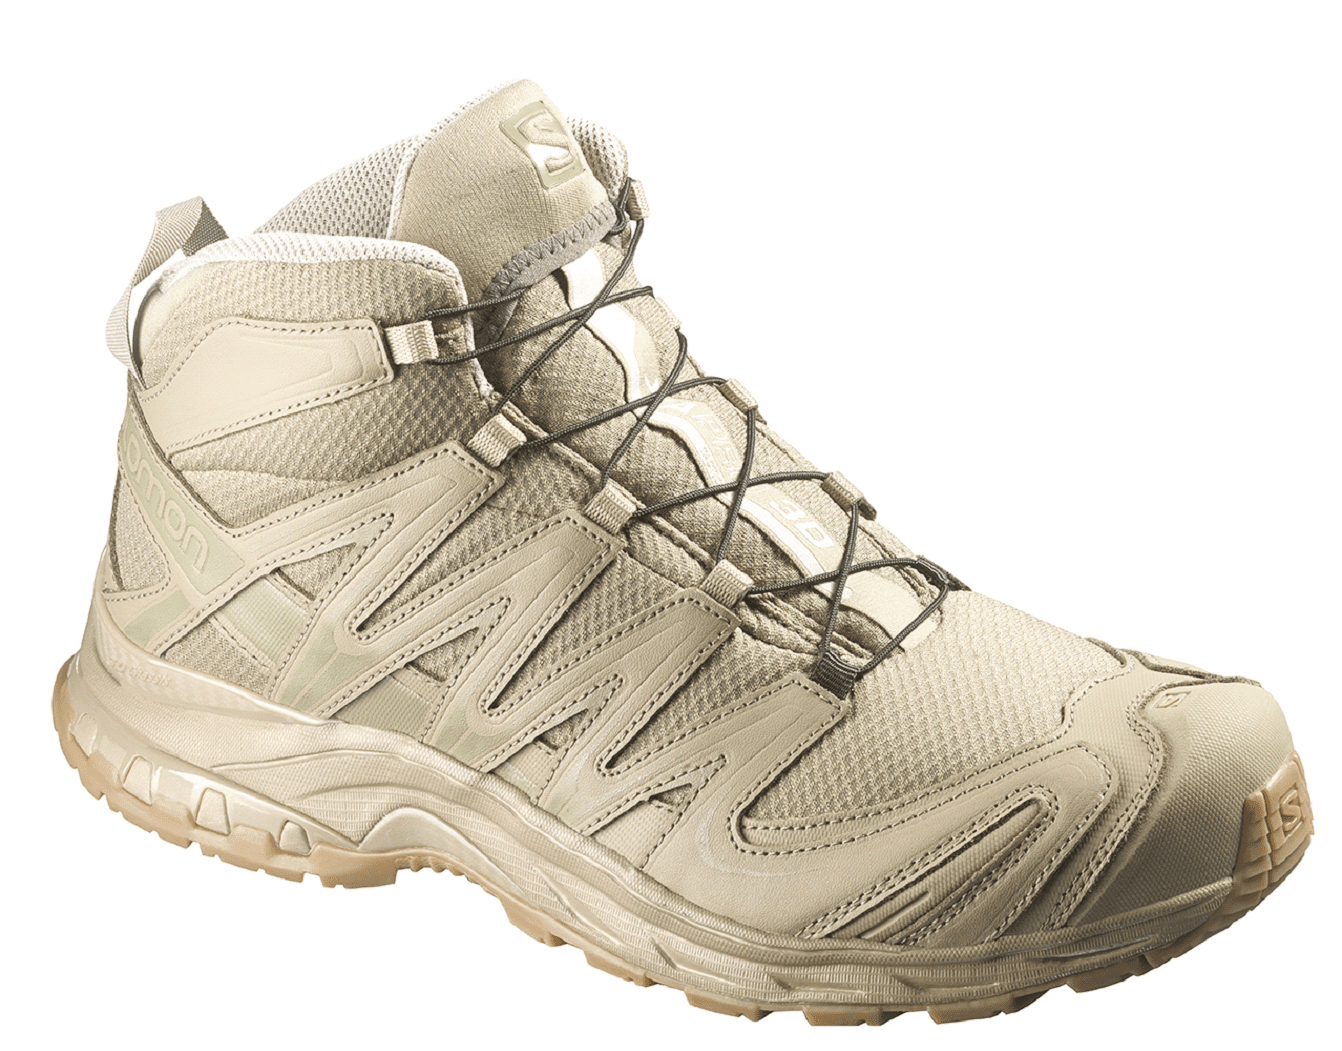 SSD Exclusive – Salomon FORCES Footwear Lineup - Soldier Daily